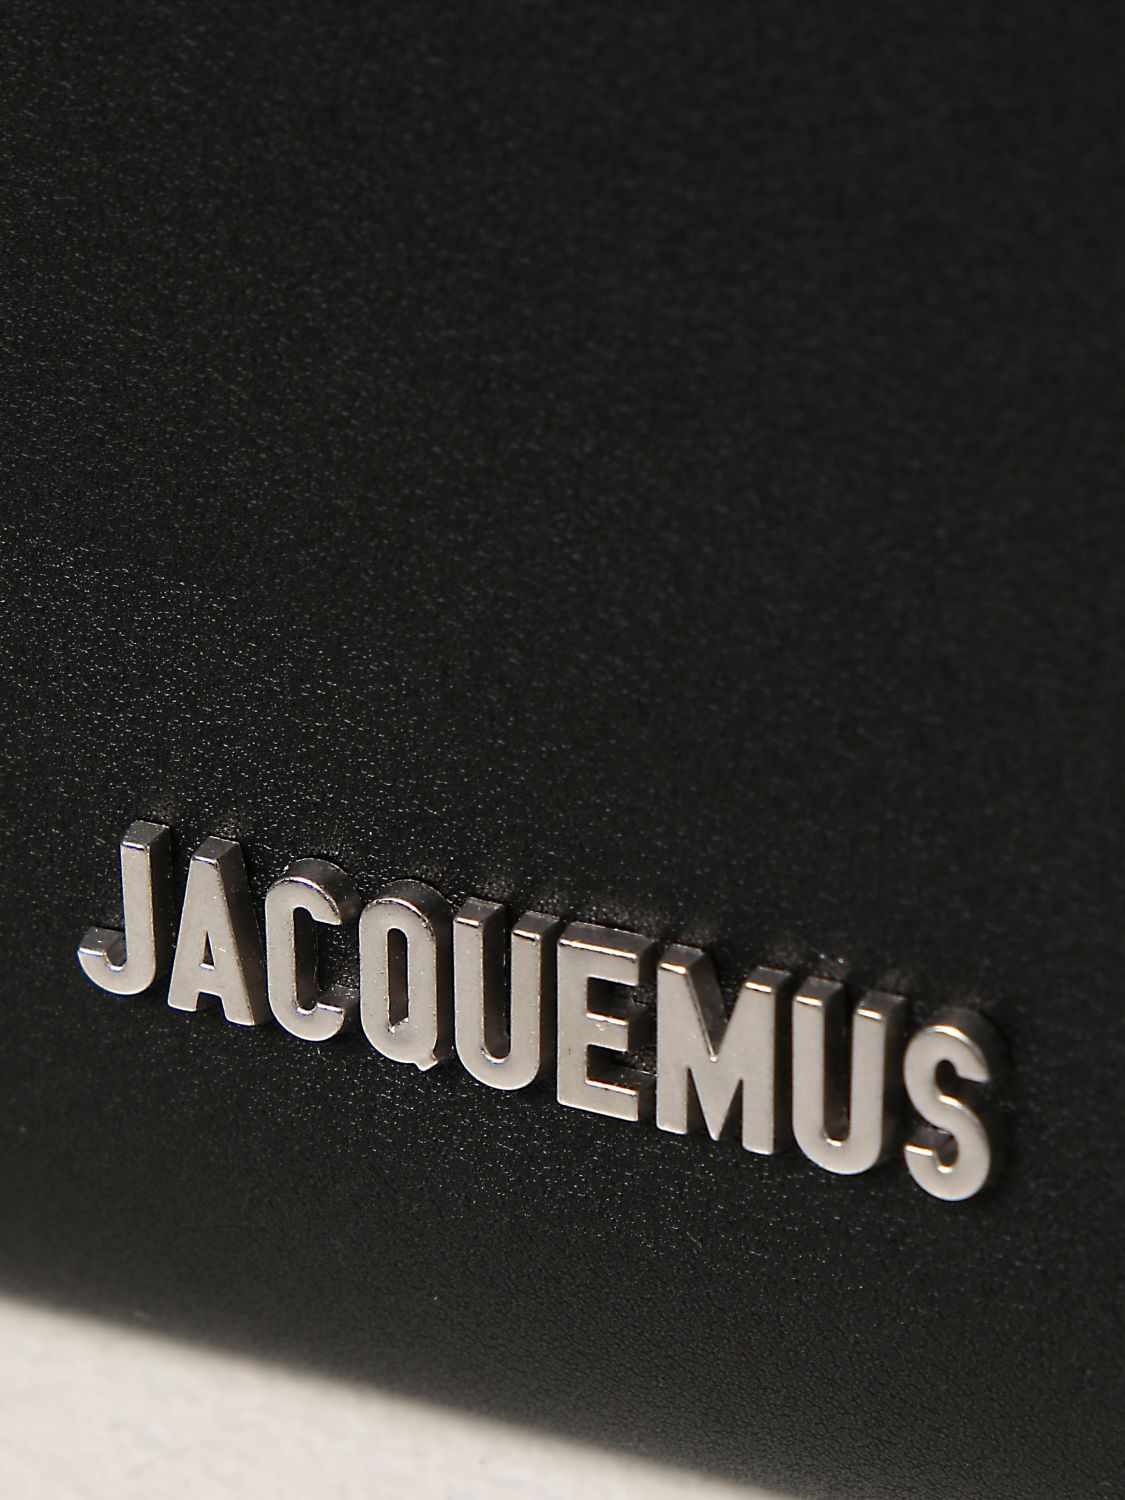 Men's JACQUEMUS Wallets Sale, Up To 70% Off